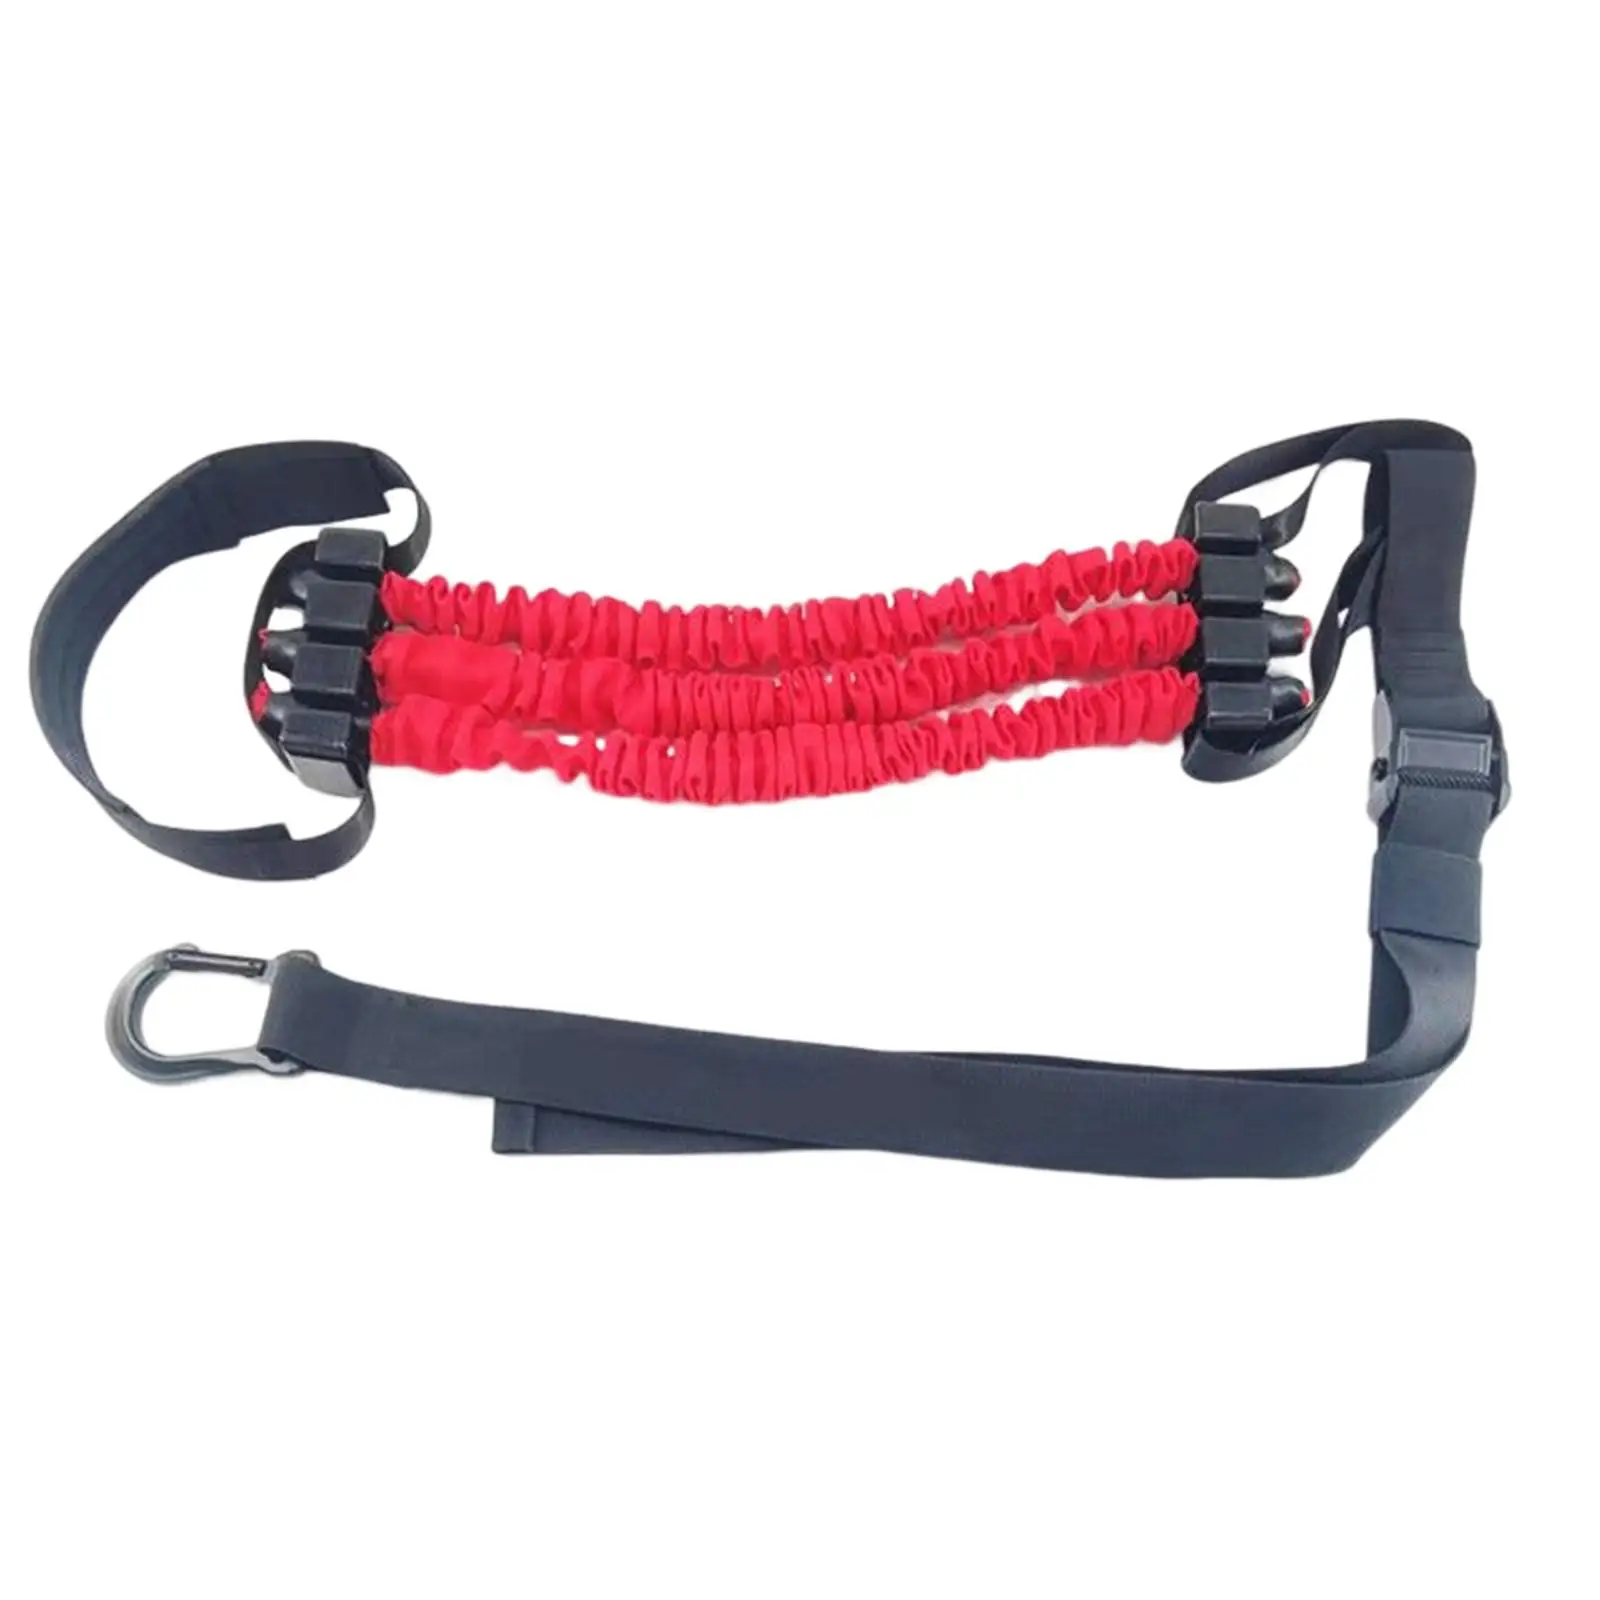 Chin up Assistance Band Improve Chest Strength Heavy Duty for Powerlifting Body Stretching